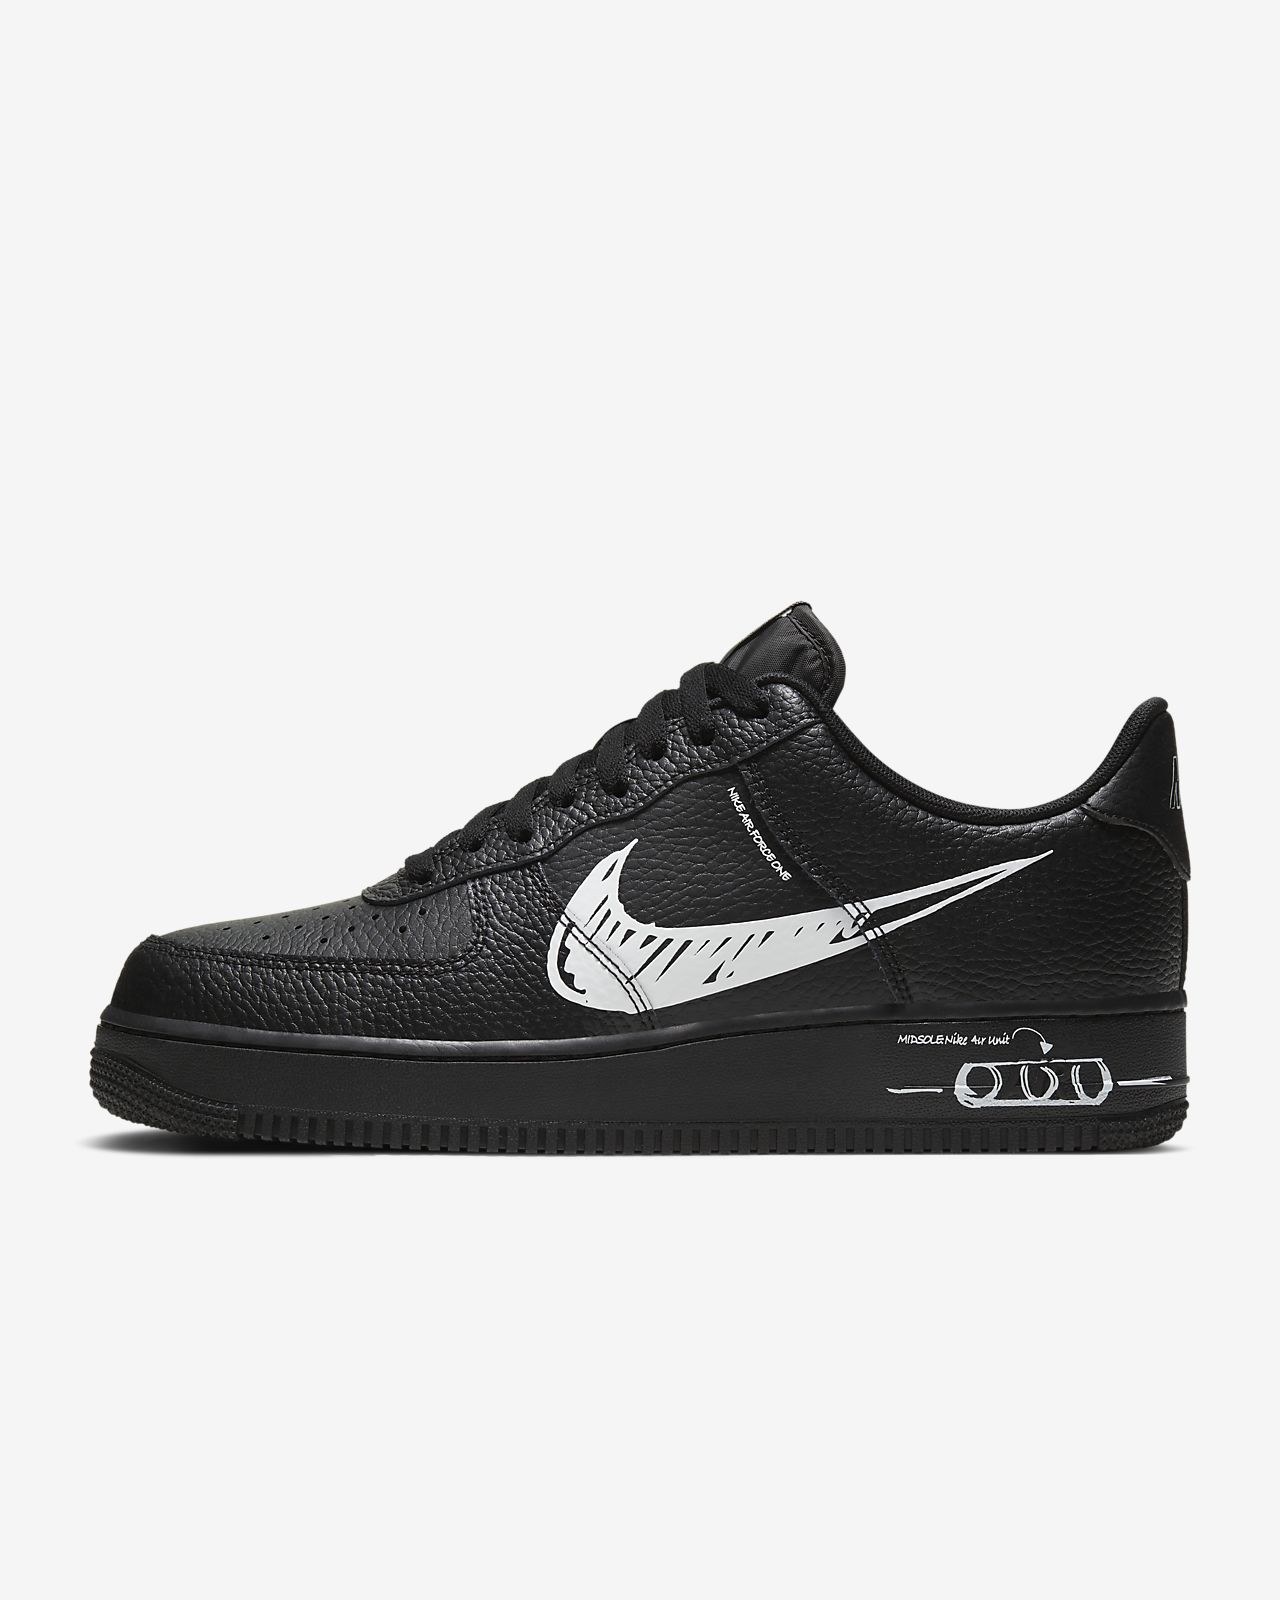 nike air force 1 lv8 utility bianche